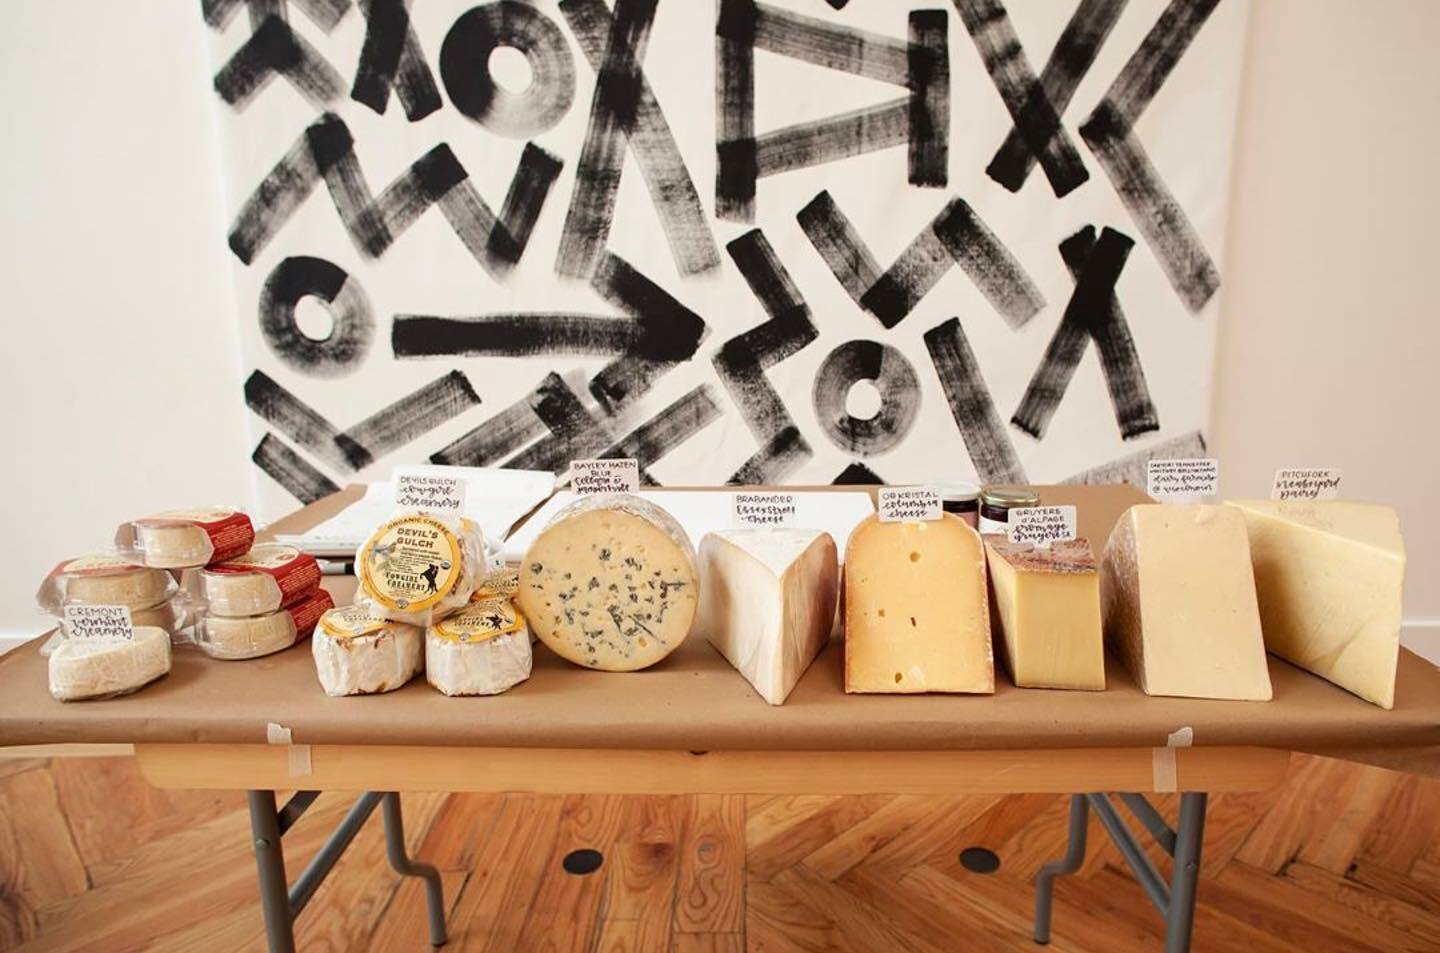 The 'Olympics of Cheese' is coming to Brooklyn this weekend